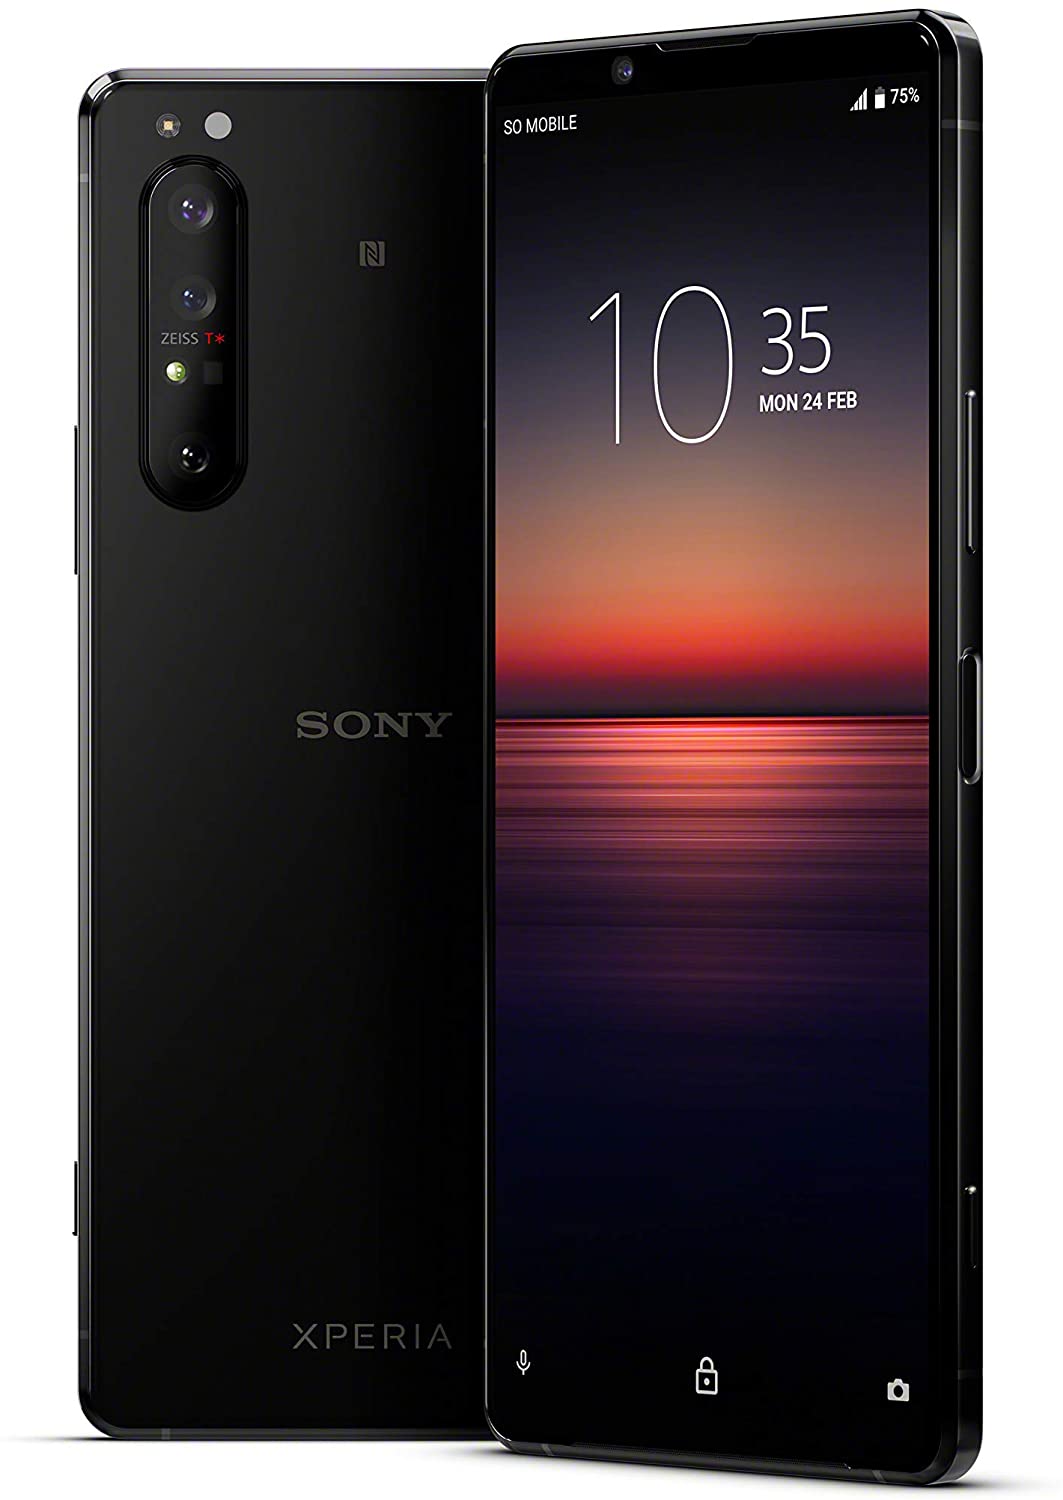 Sony Xperia 1 II Price And Full Specification - ITHelpSupport.com